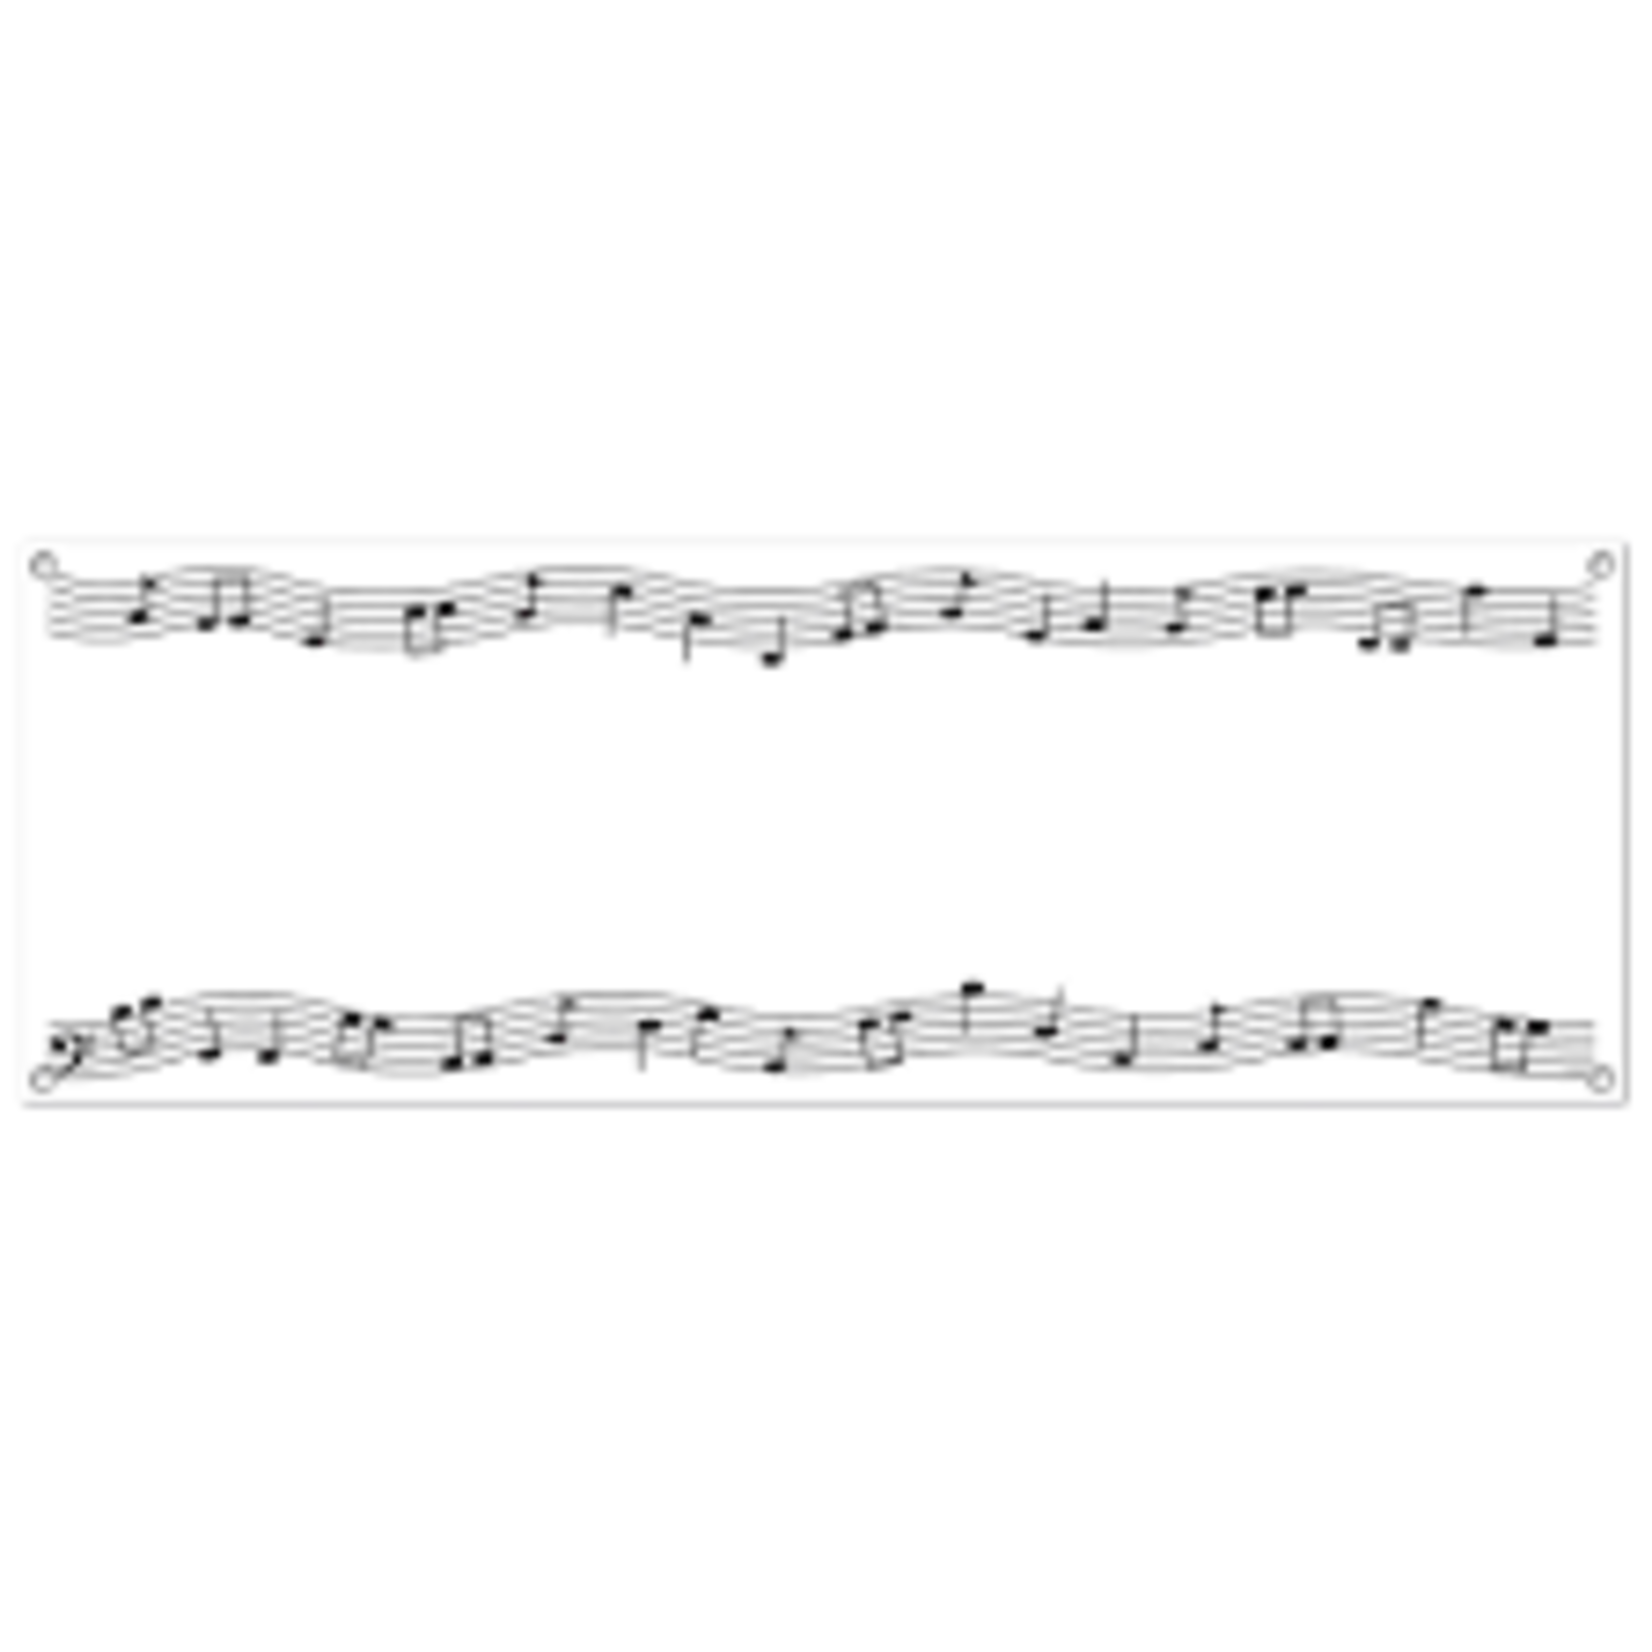 Beistle Musical Notes Customizable Banner - 21" x 5'